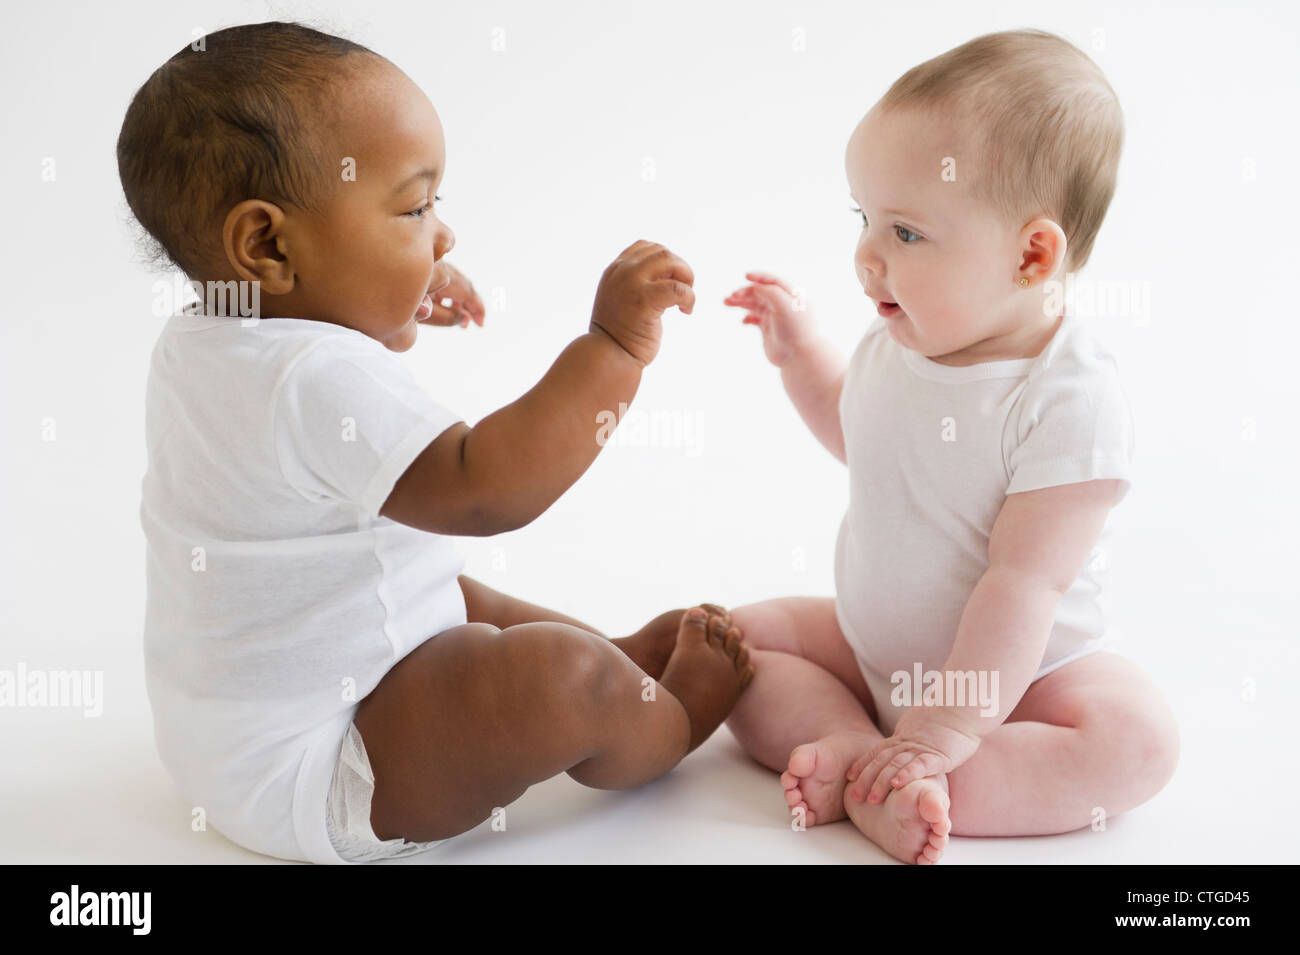 Babies playing together on floor Stock Photo